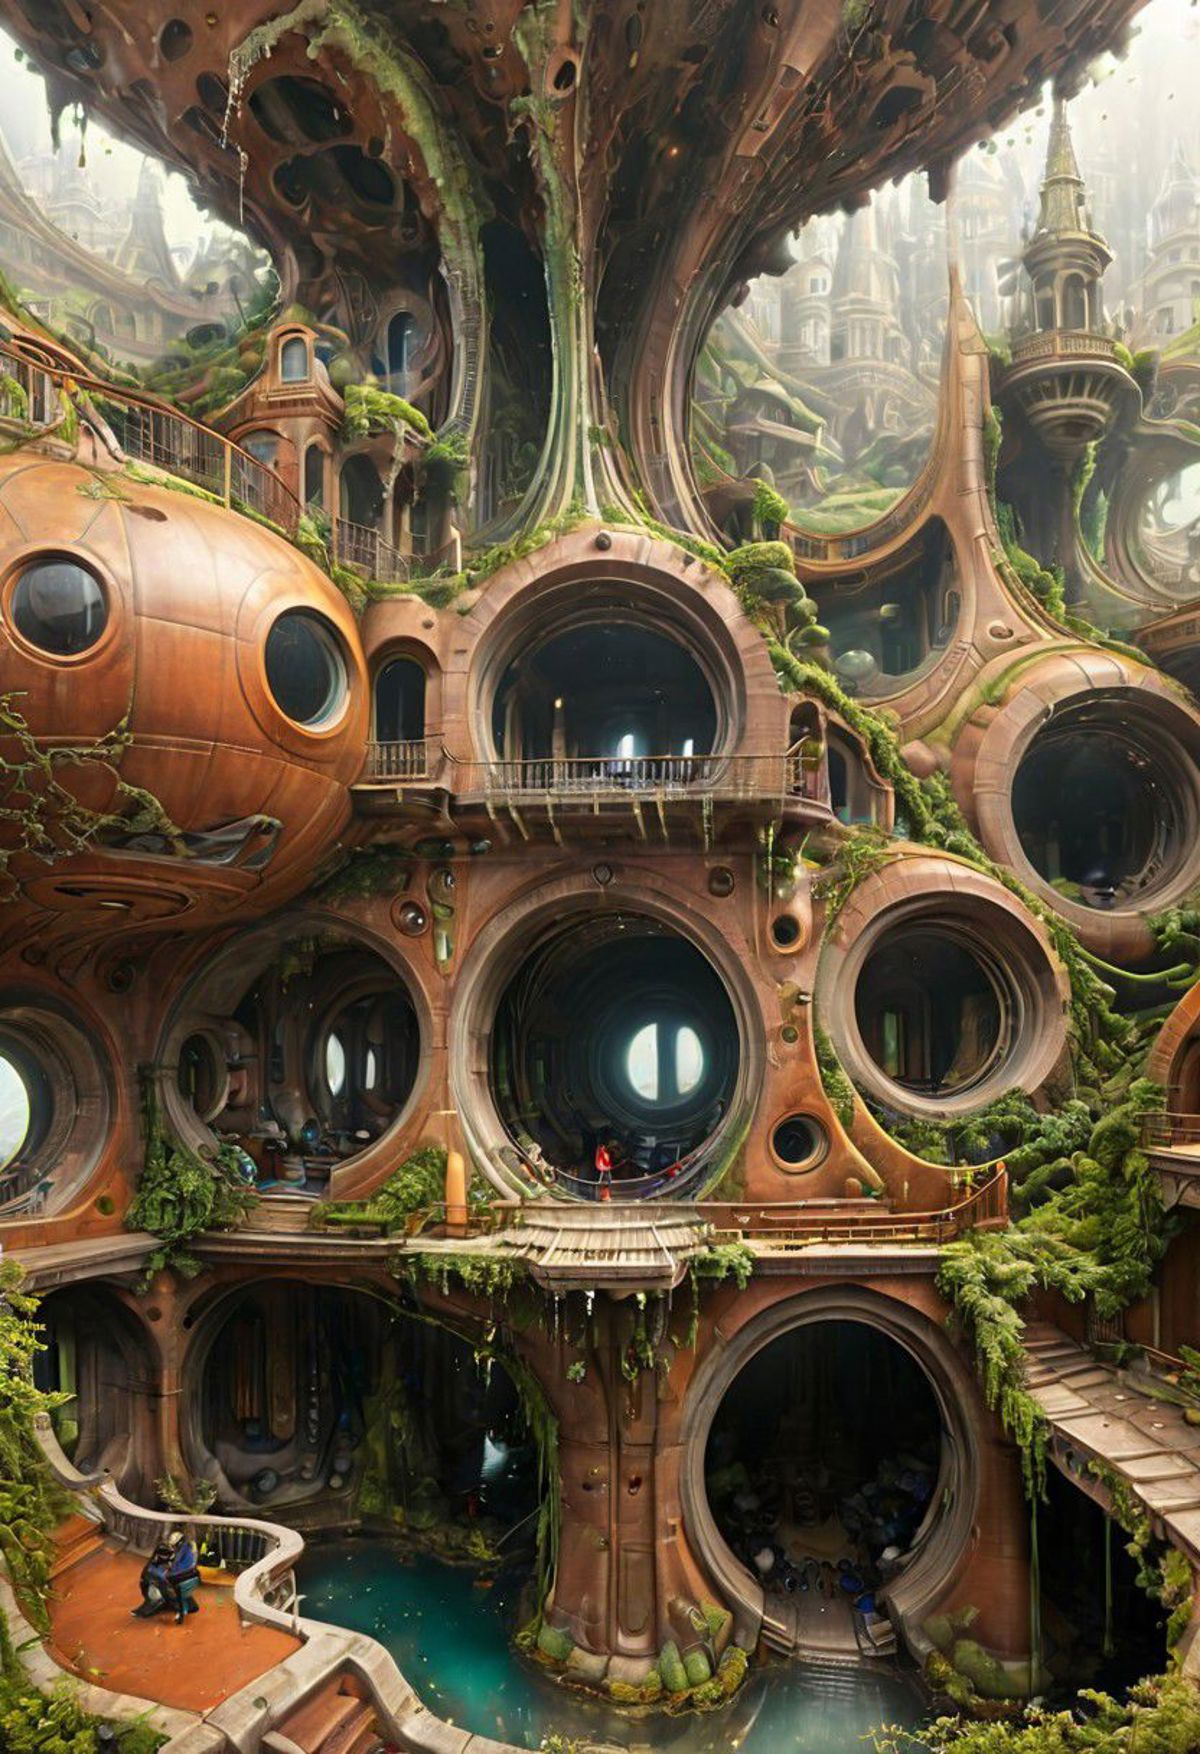 A Fantastical World of Dwarf Homes and Towers Surrounded by Plants and Trees